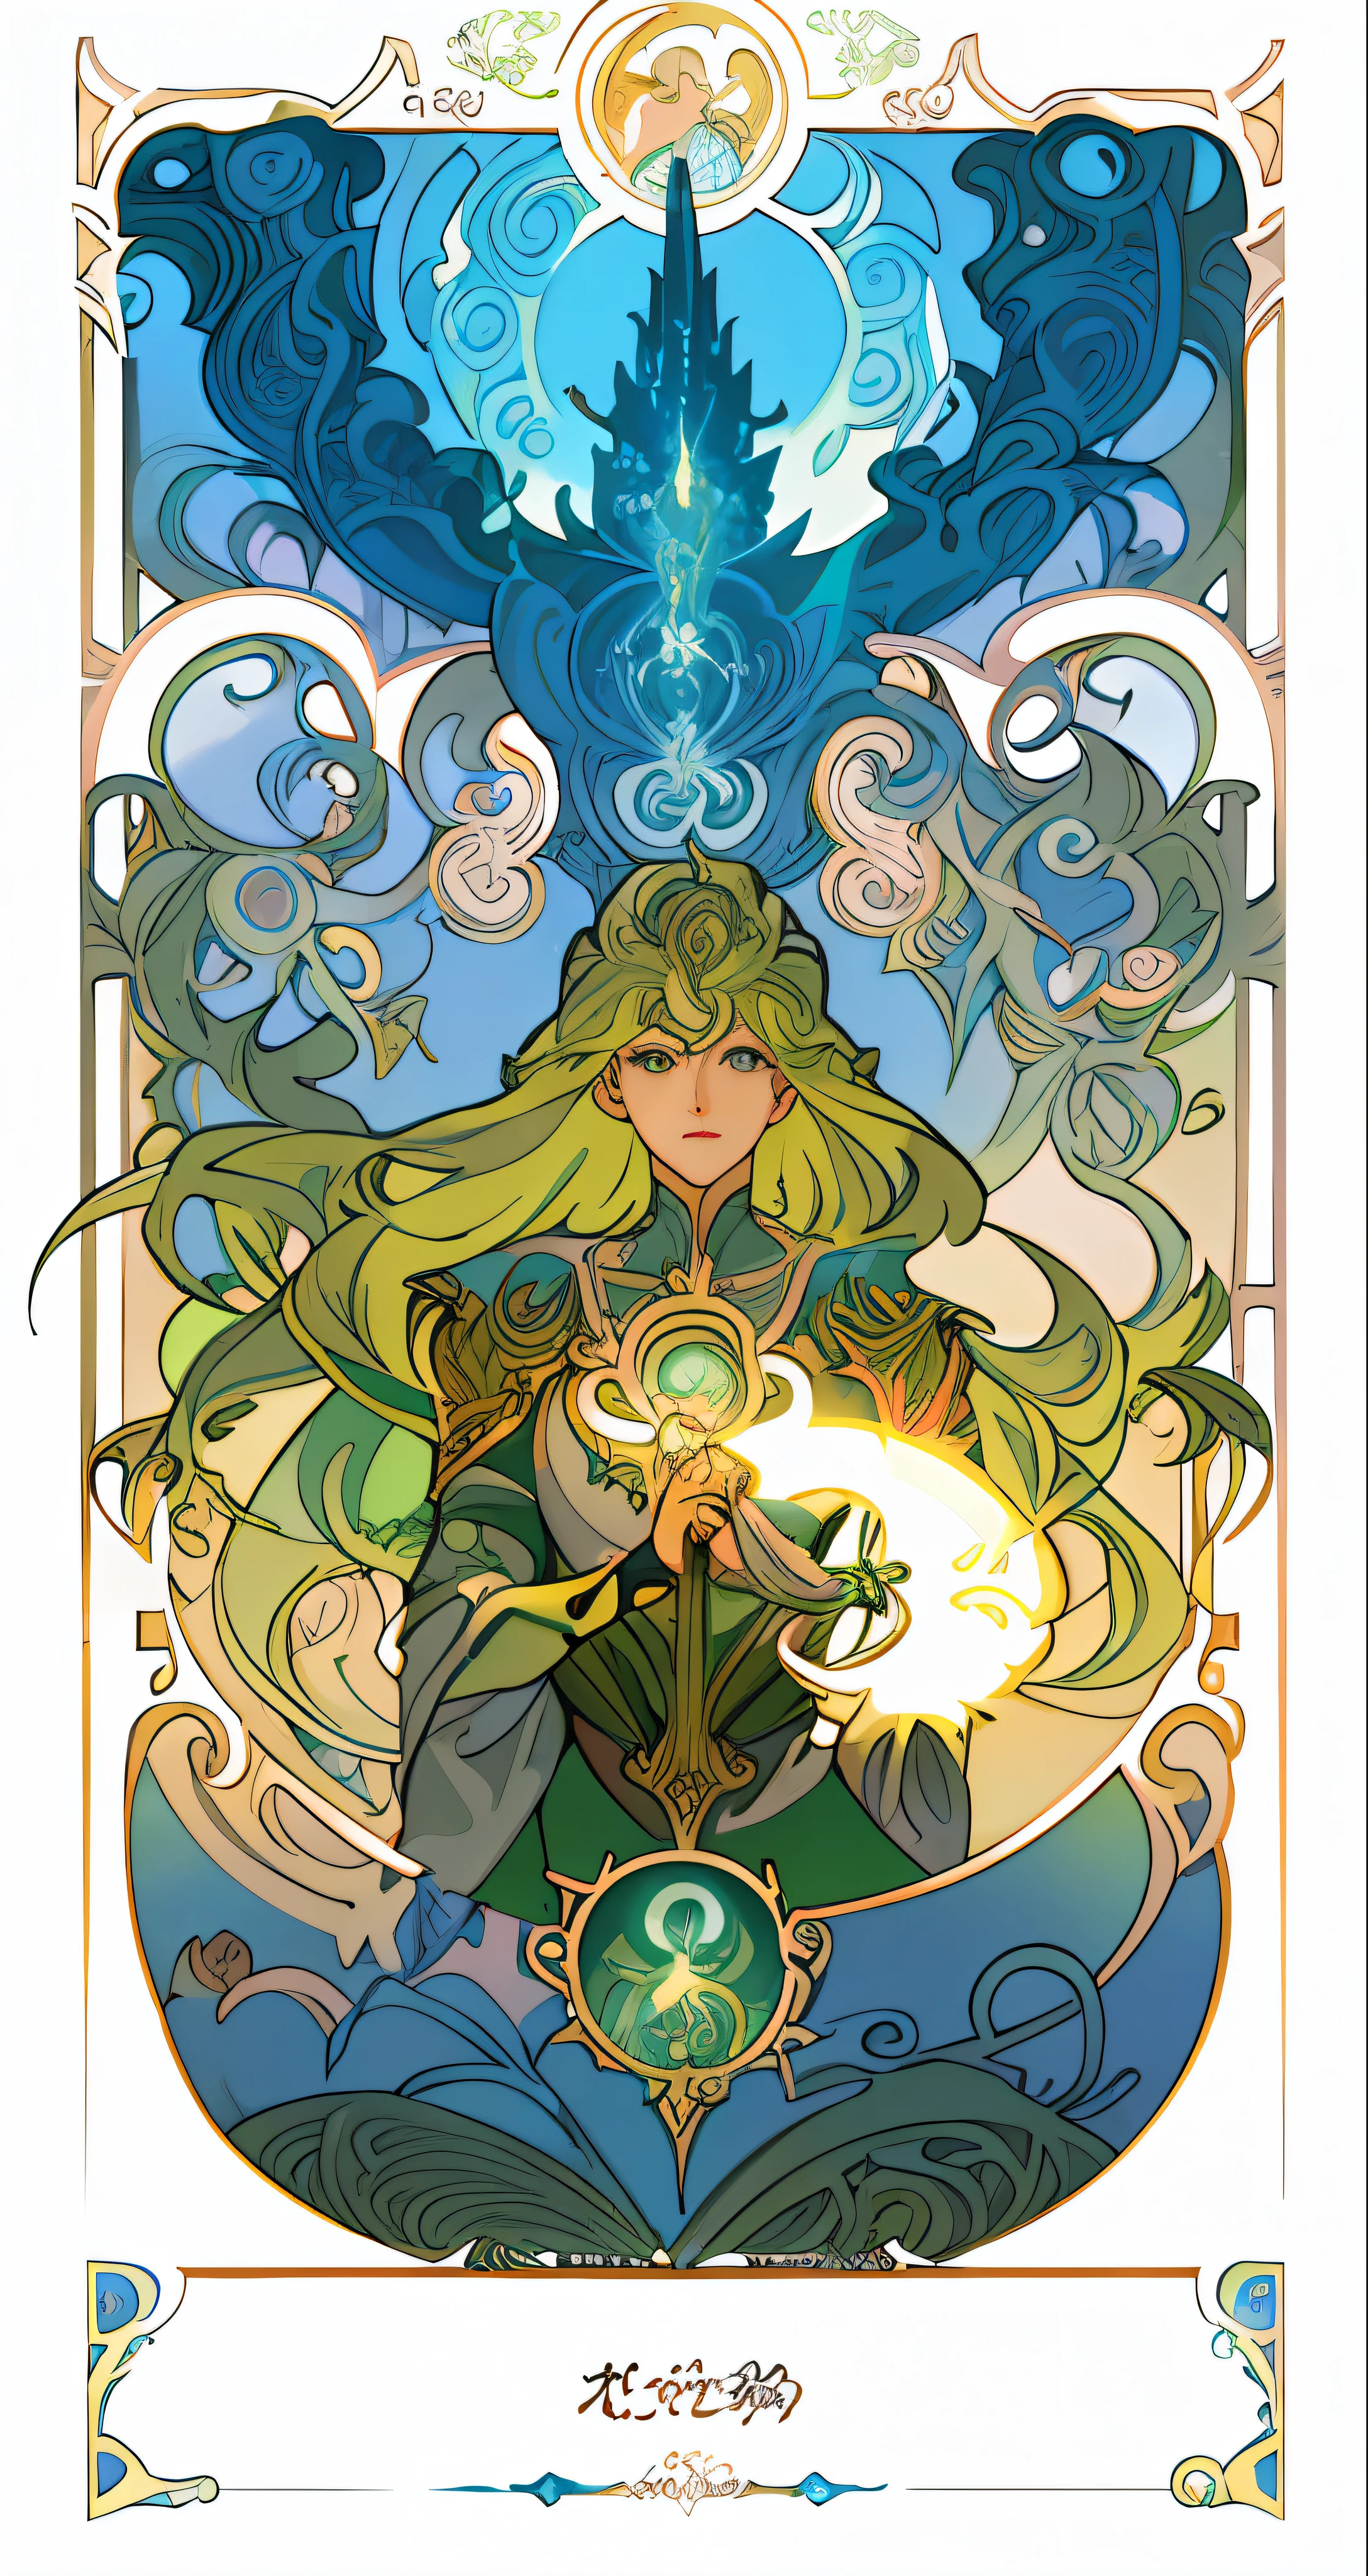 a drawing of a woman with a green hair and a green cape holding a light, alphonse mucha and rossdraws, in the art style of mohrbacher, anime art nouveau, trending on artstation pixiv, full art illustration, anime fantasy illustration, magic the gathering art style, digital 2d fantasy art, mucha. art nouveau. gloomhaven